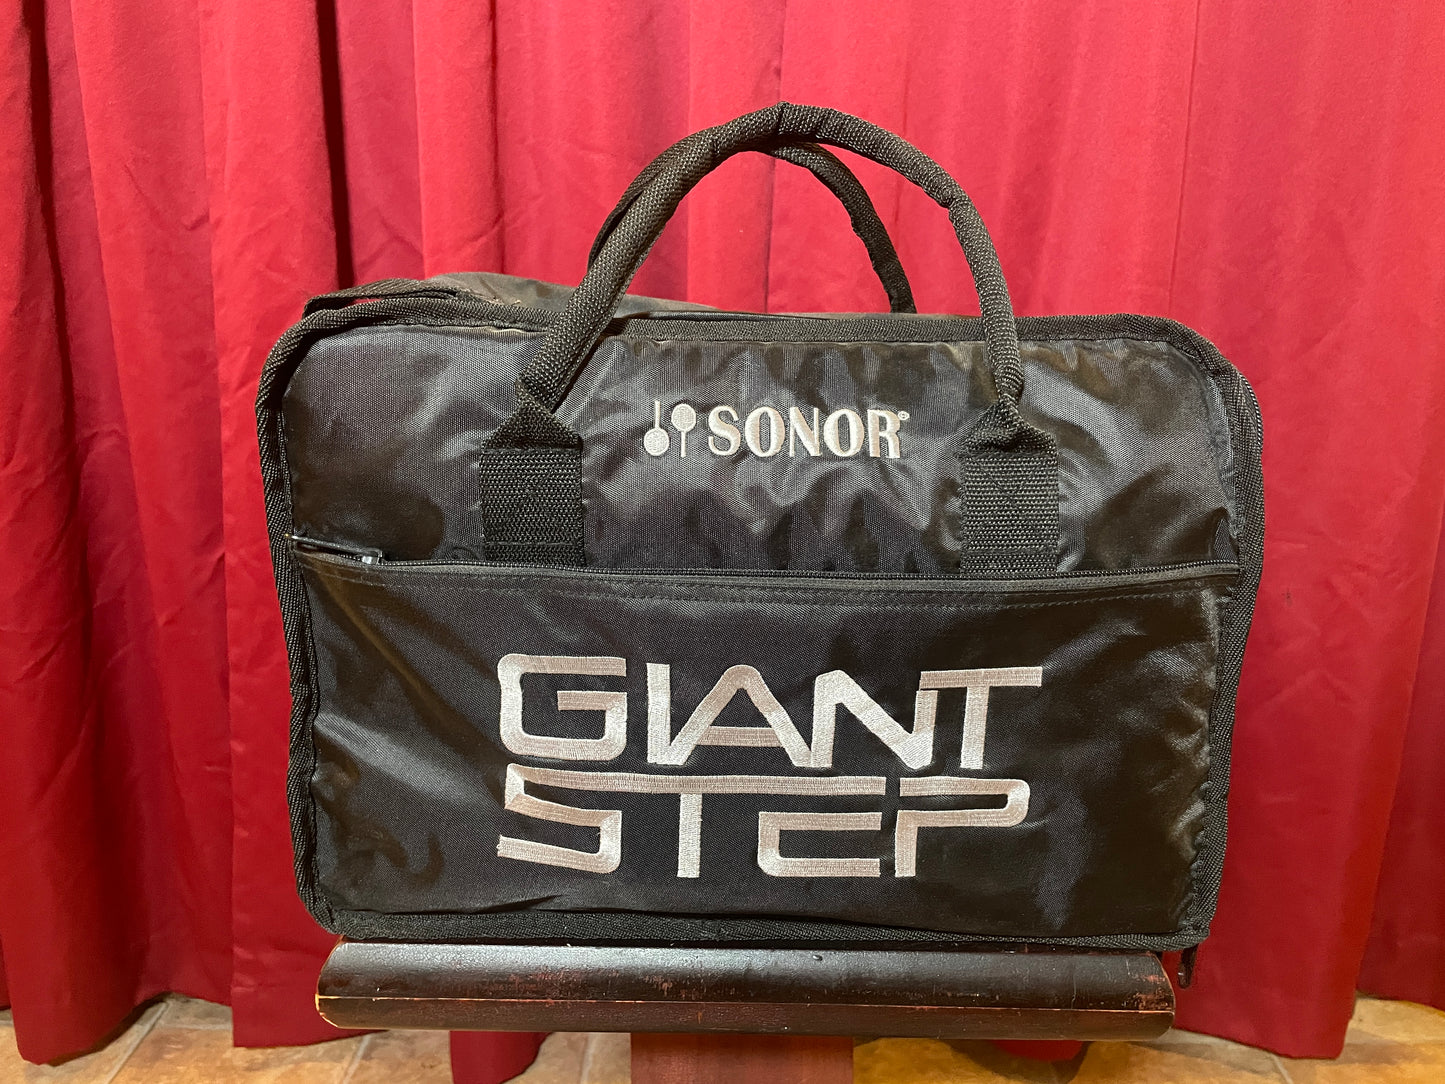 Sonor Giant Step Single Bass Drum Pedal w/ Case - Brand New